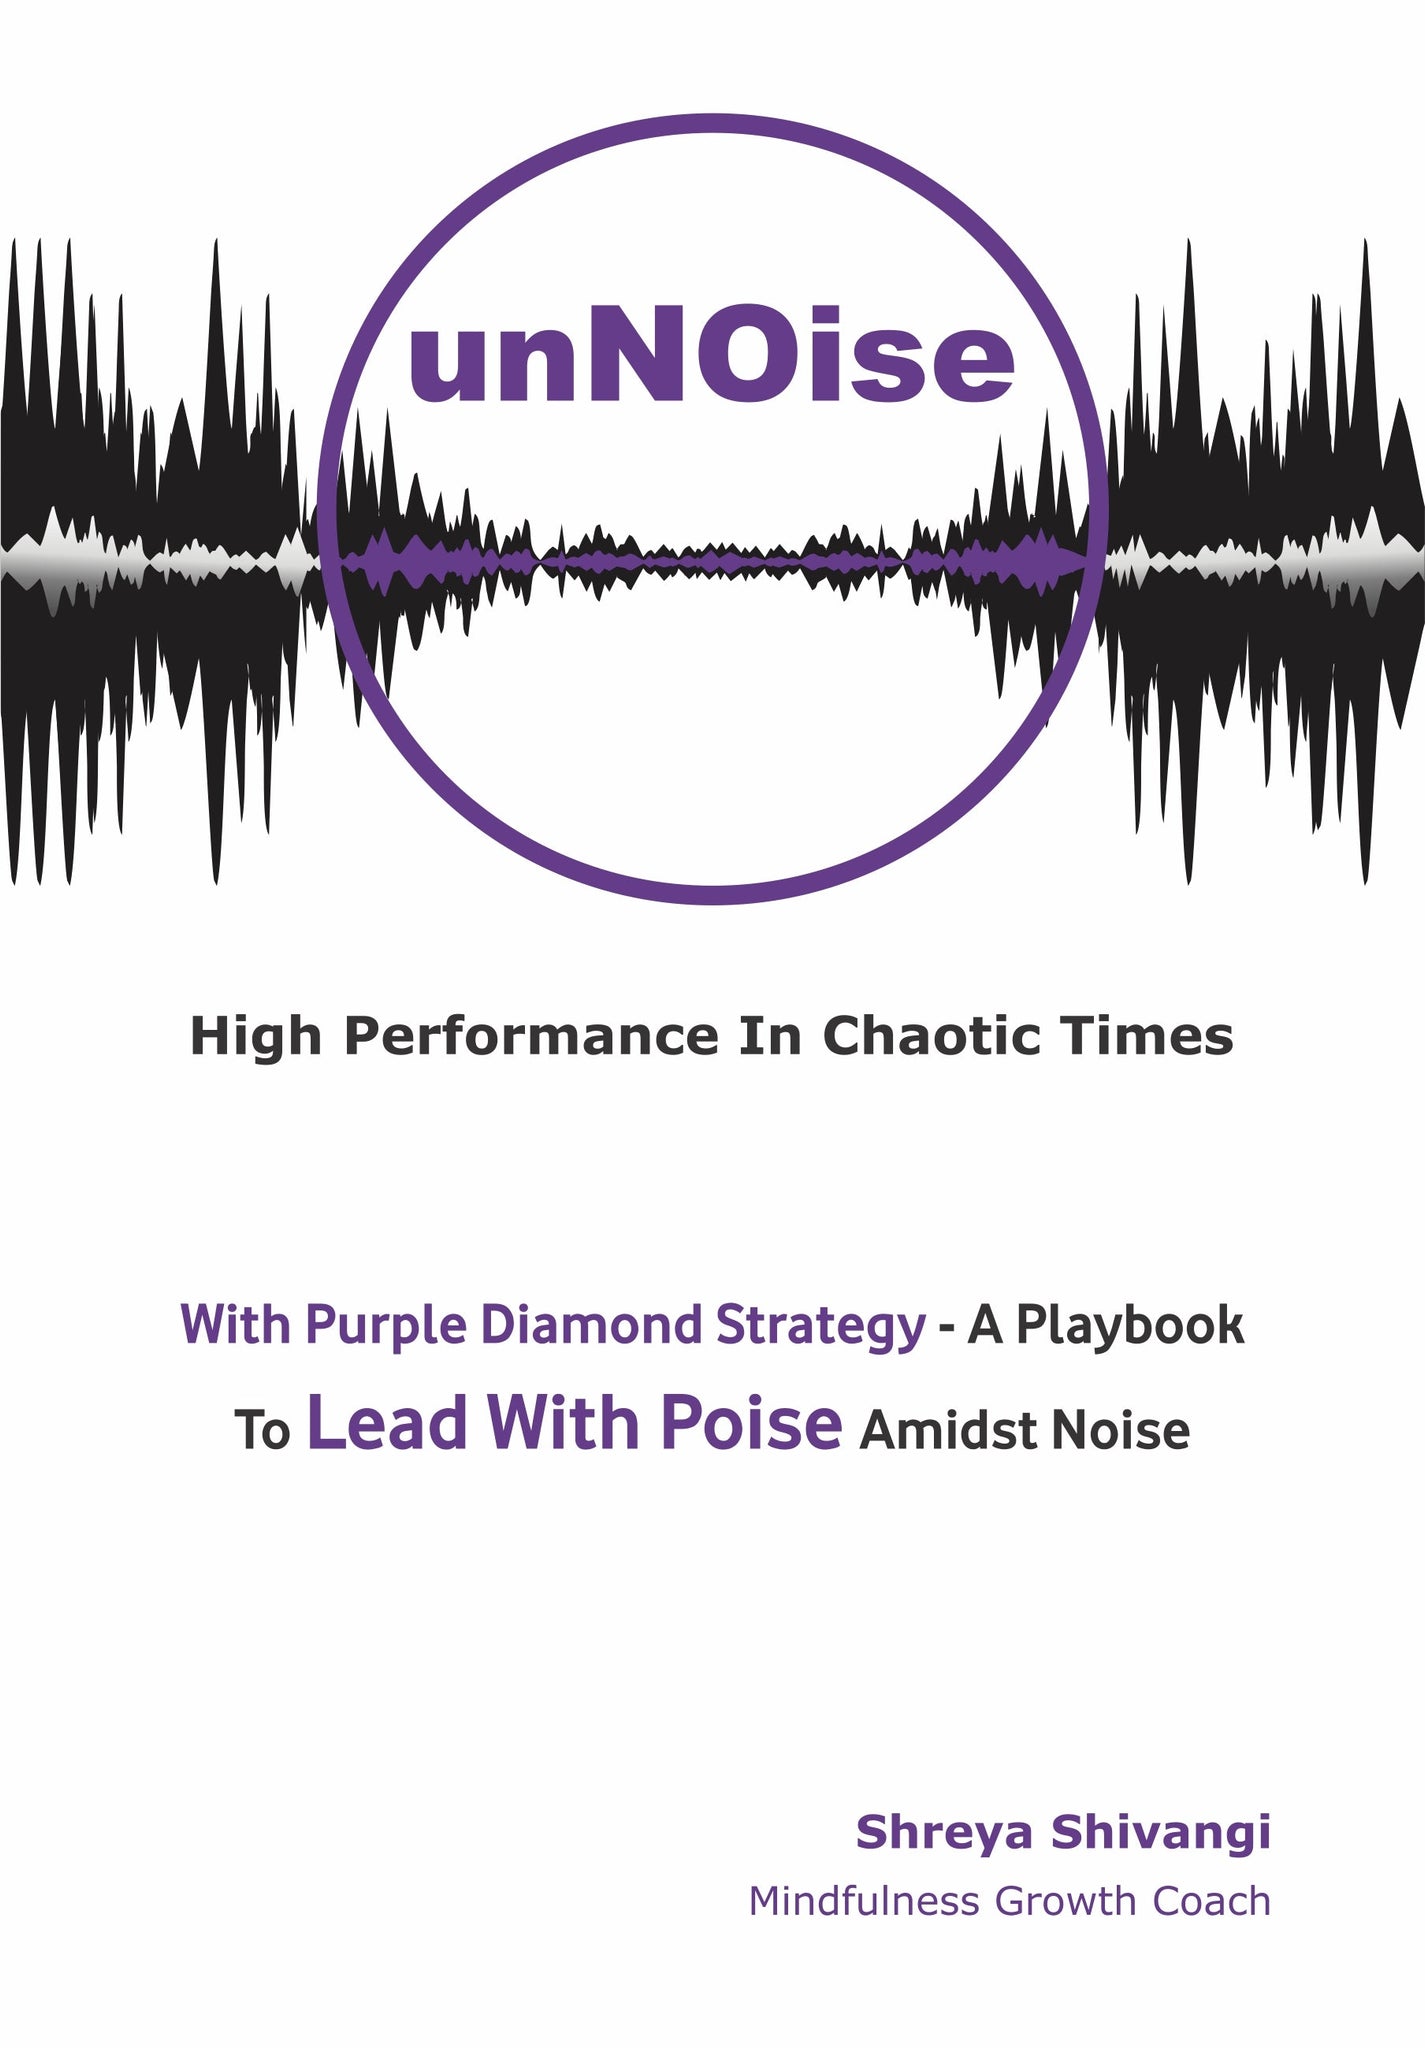 unNOise: High Performance In Chaotic Times